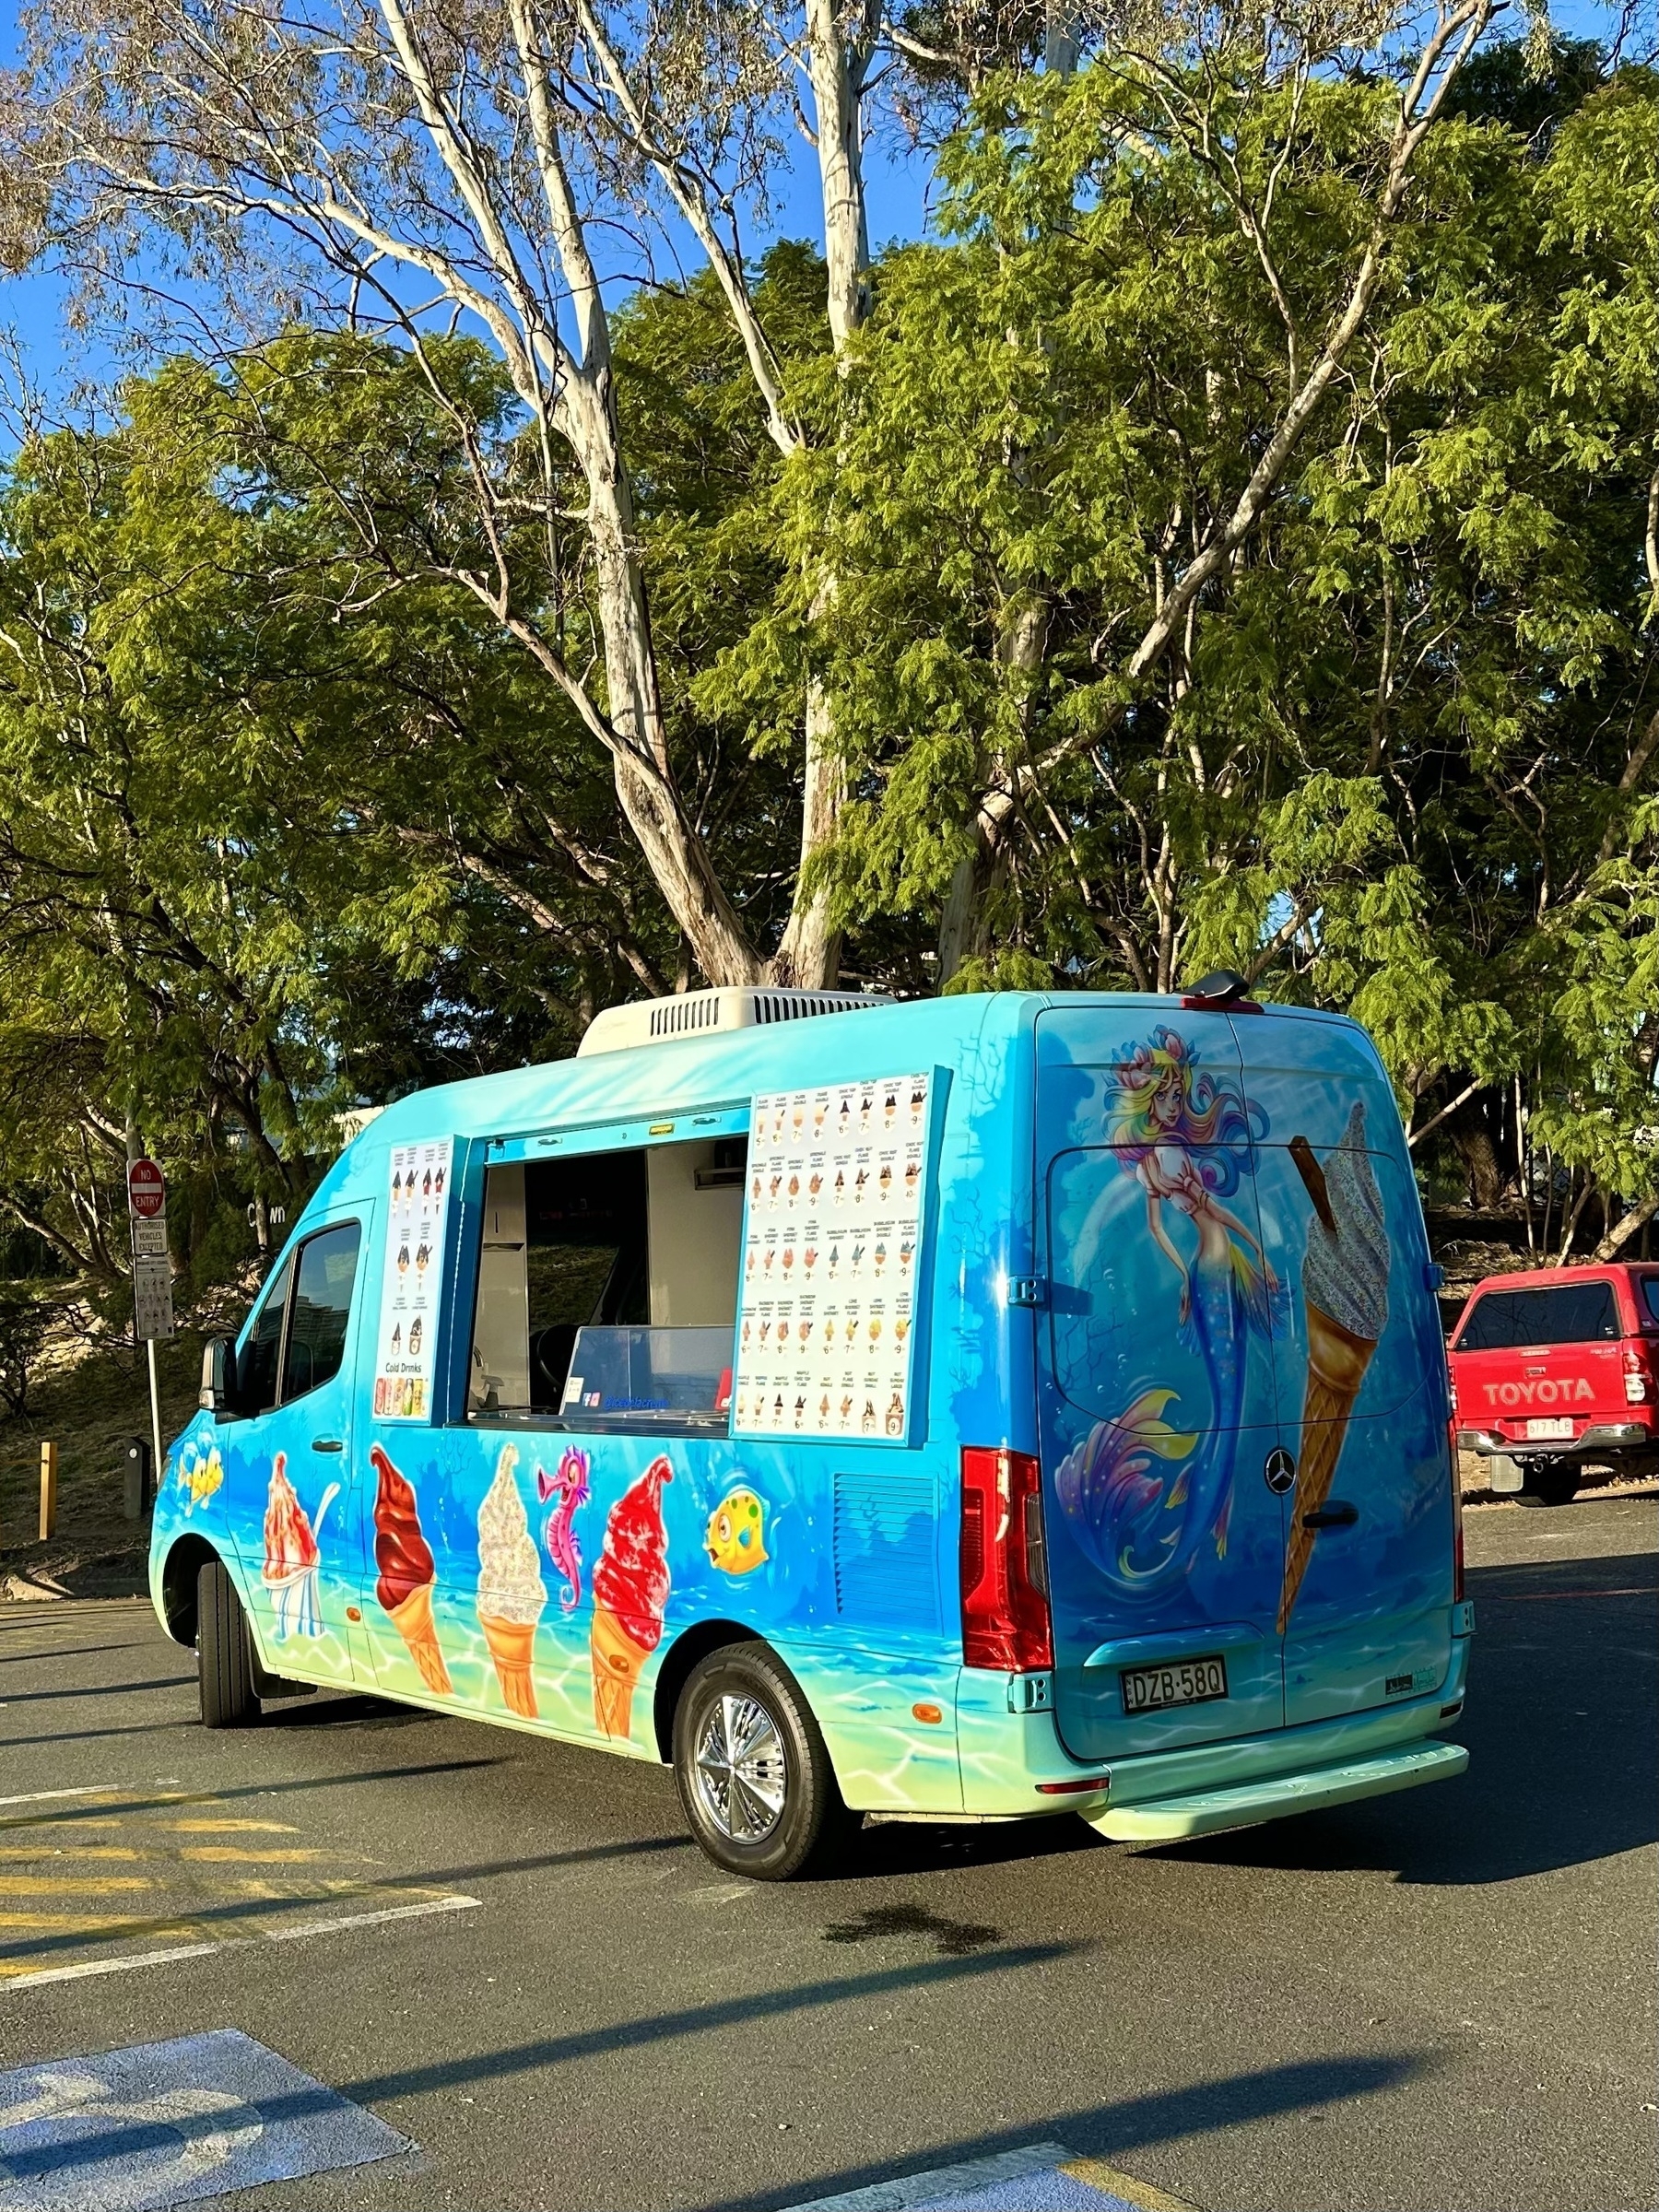 A blue ice cream van parked in front of some trees. The side counter is open and the doors hooked back show the ice creams available. There are ice creams painted in different colours on the truck. The big rear doors have a mermaid and a large ice cream painted on them.